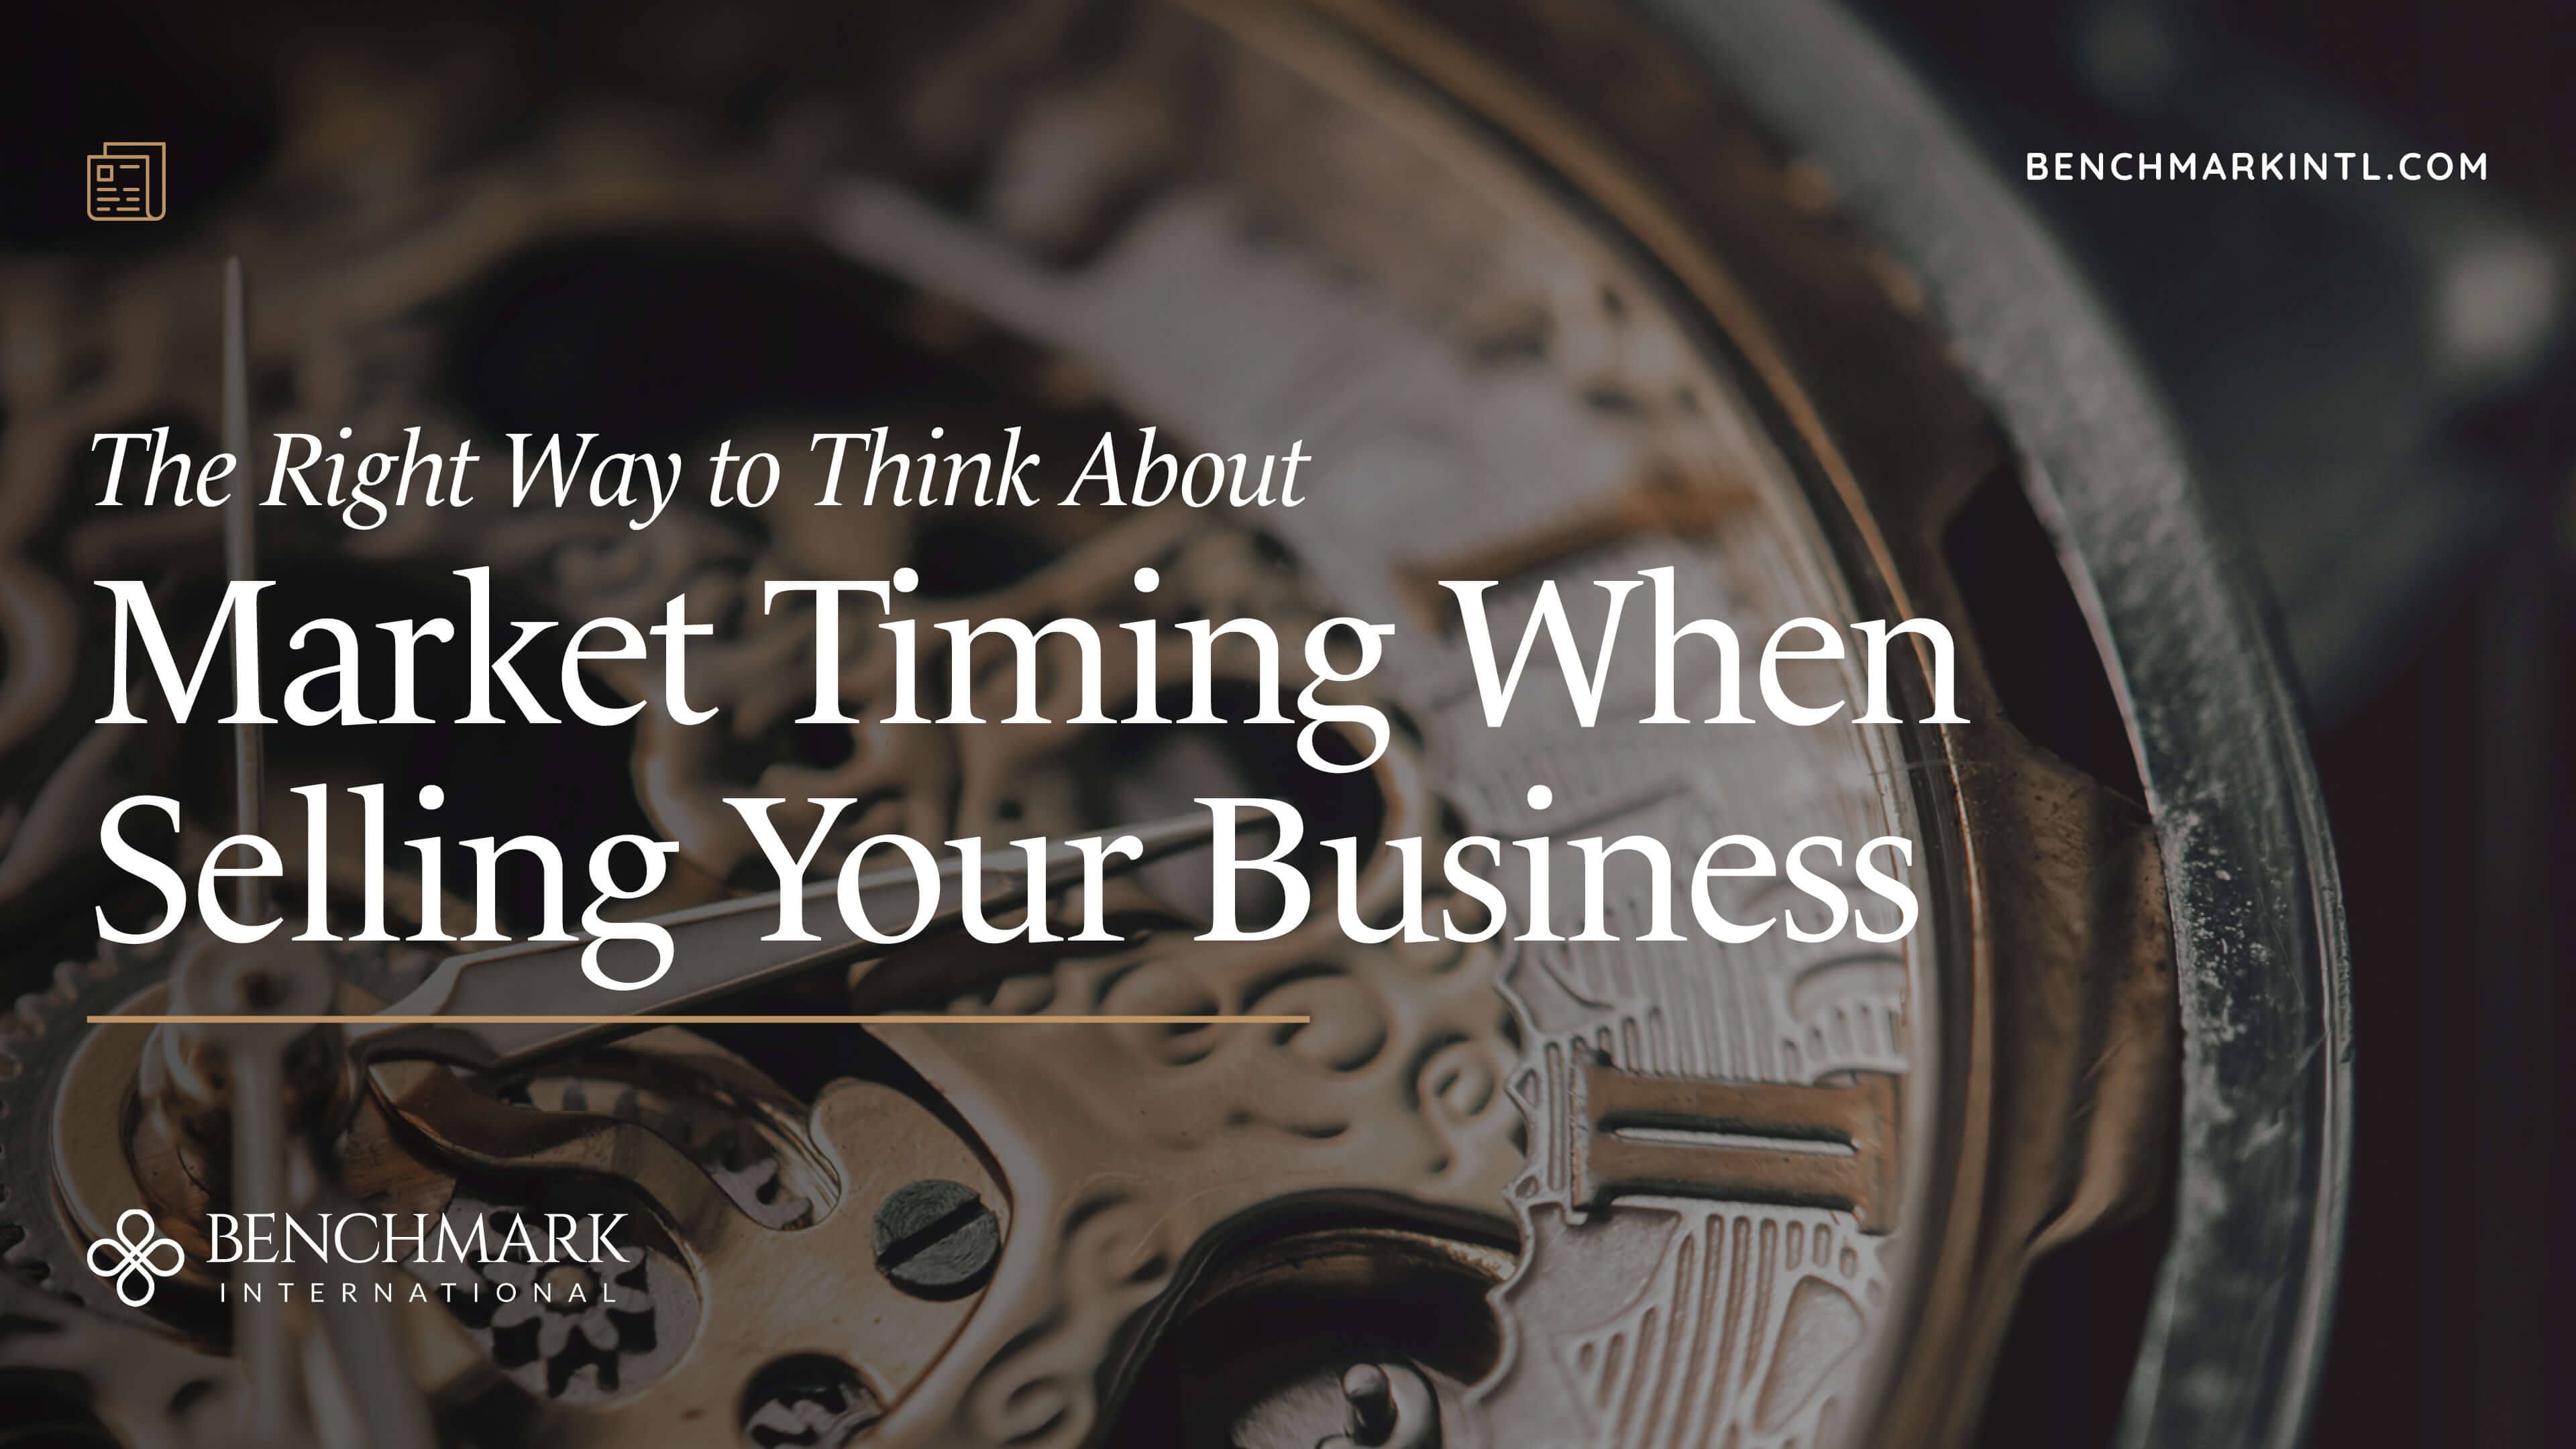 The Right Way To Think About Market Timing When Selling Your Business